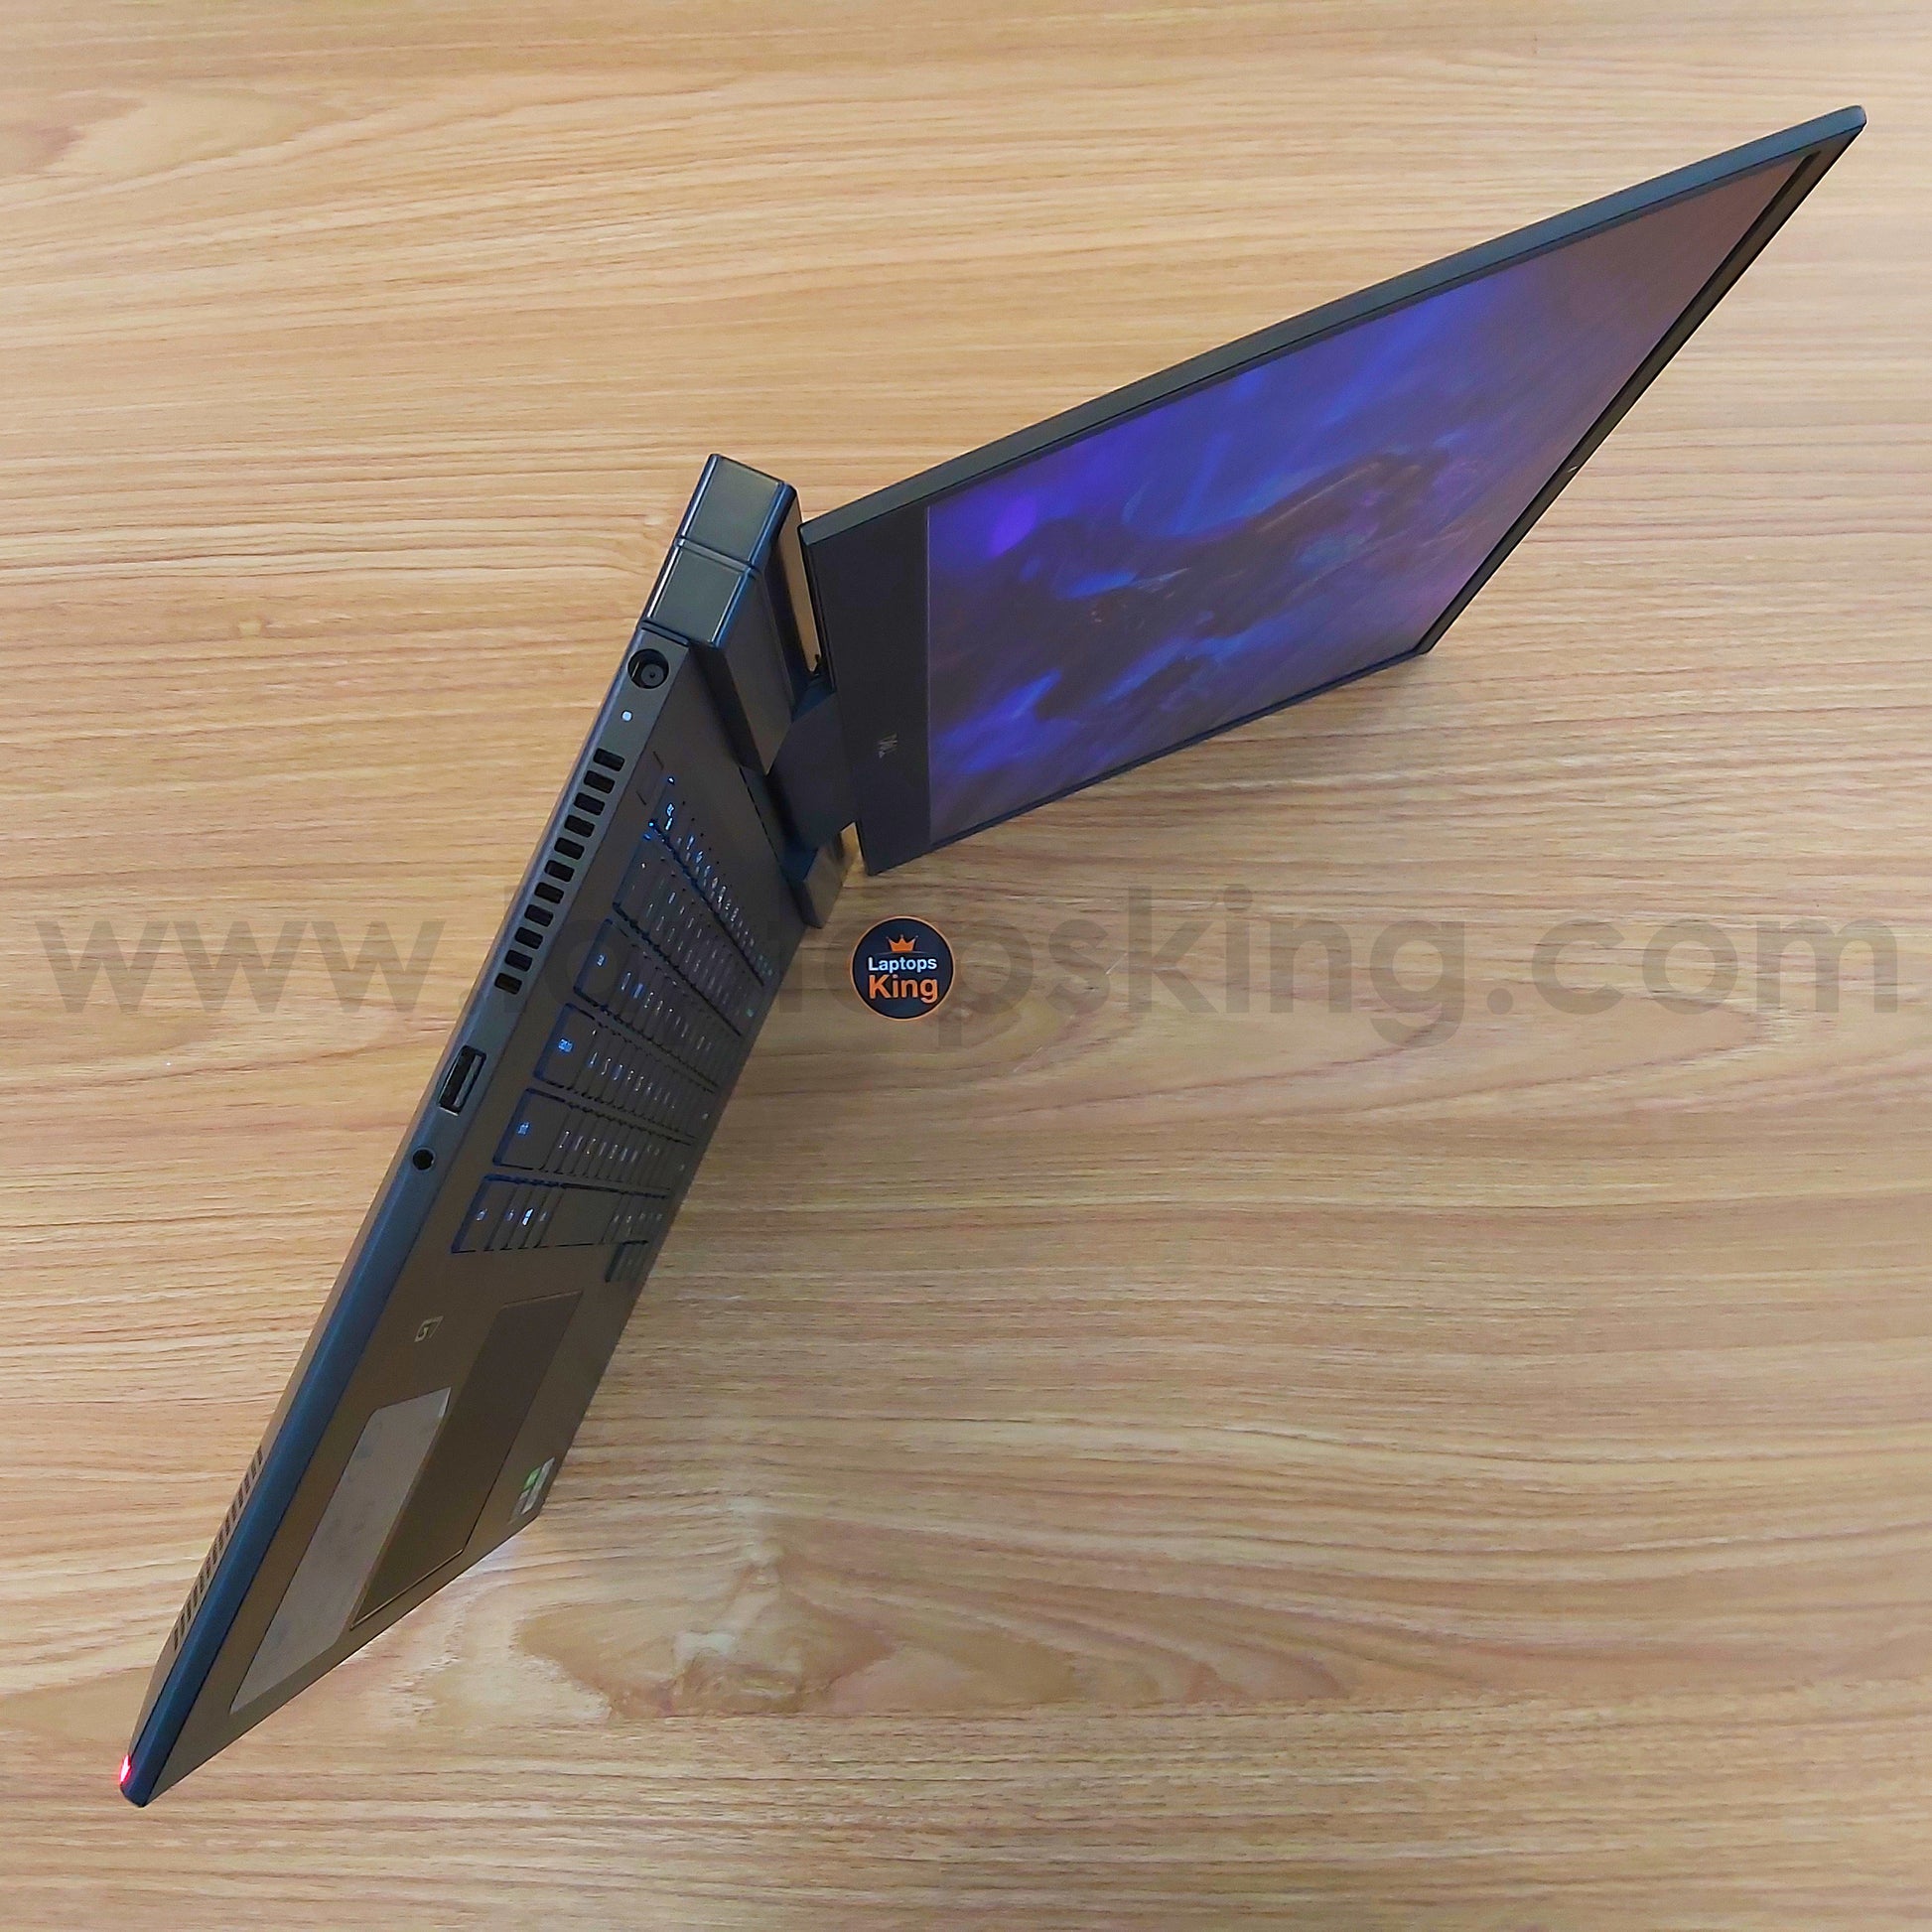 Dell G7 7500 i9-10885H RTX 2070 300HZ Gaming Laptop (Open Box) Gaming laptop, Graphic Design laptop, best laptop for gaming, best laptop for graphic design, computer for sale Lebanon, laptop for video editing in Lebanon, laptop for sale Lebanon, best graphic design laptop,	best video editing laptop, best programming laptop, laptop for sale in Lebanon, laptops for sale in Lebanon, laptop for sale in Lebanon, buy computer Lebanon, buy laptop Lebanon.